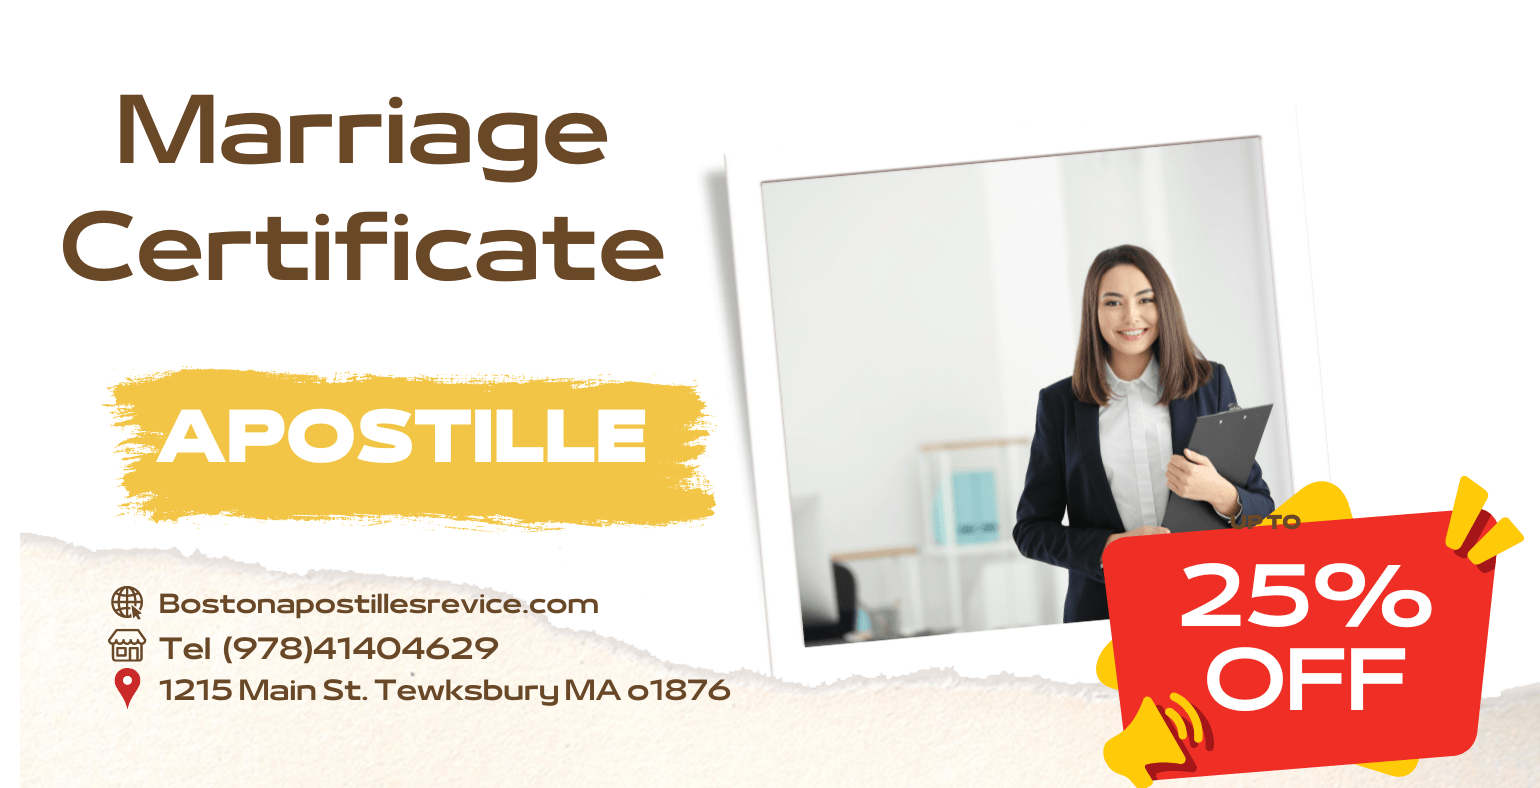 Apostille Service In Lowell MA